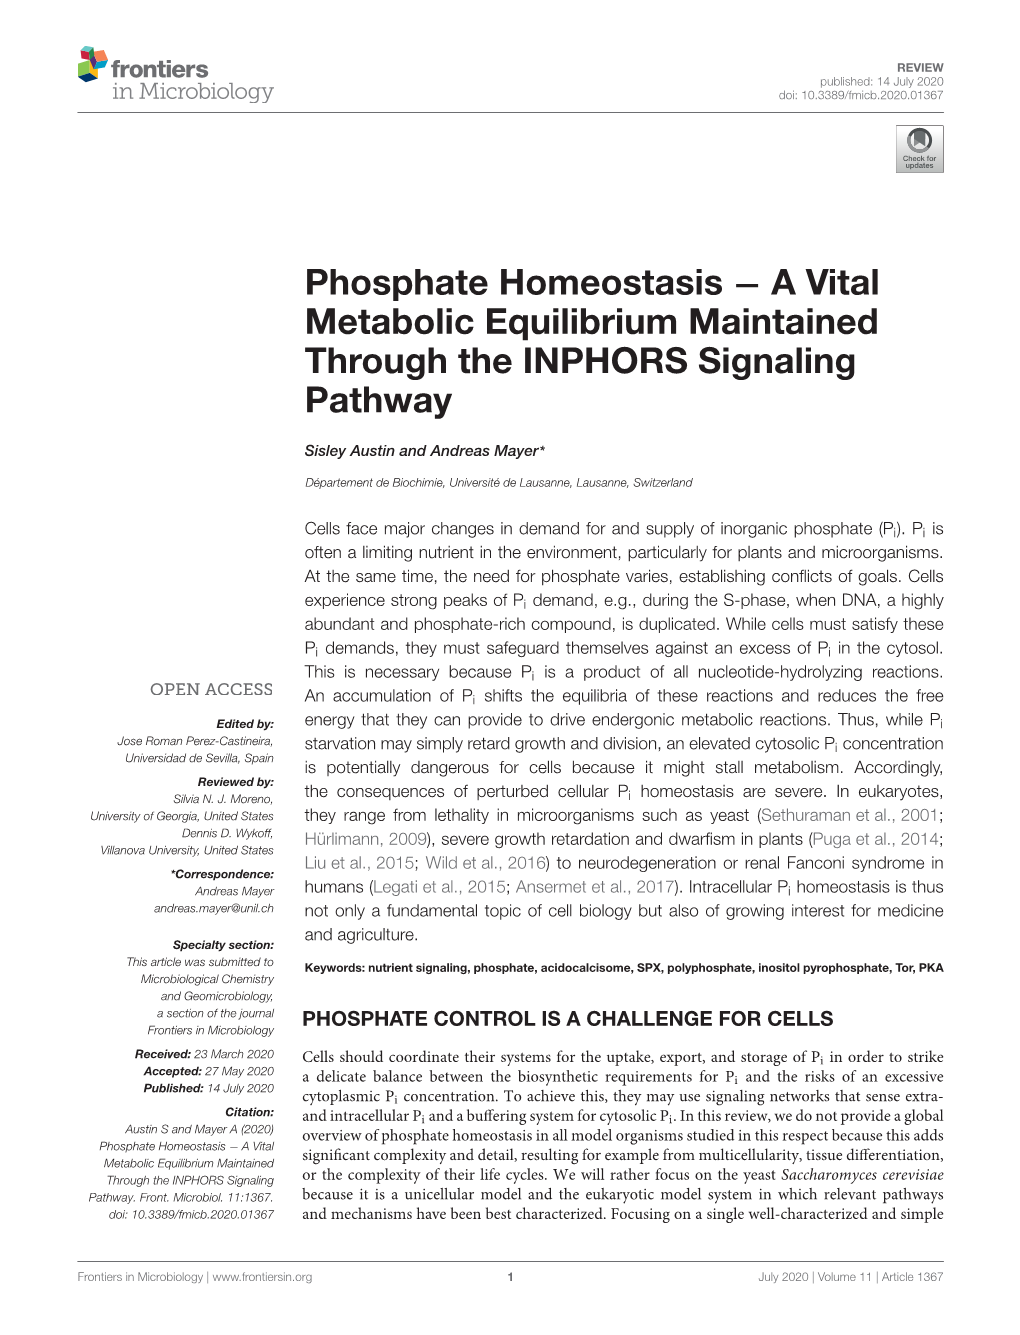 Phosphate Homeostasis − a Vital Metabolic Equilibrium Maintained Through the INPHORS Signaling Pathway